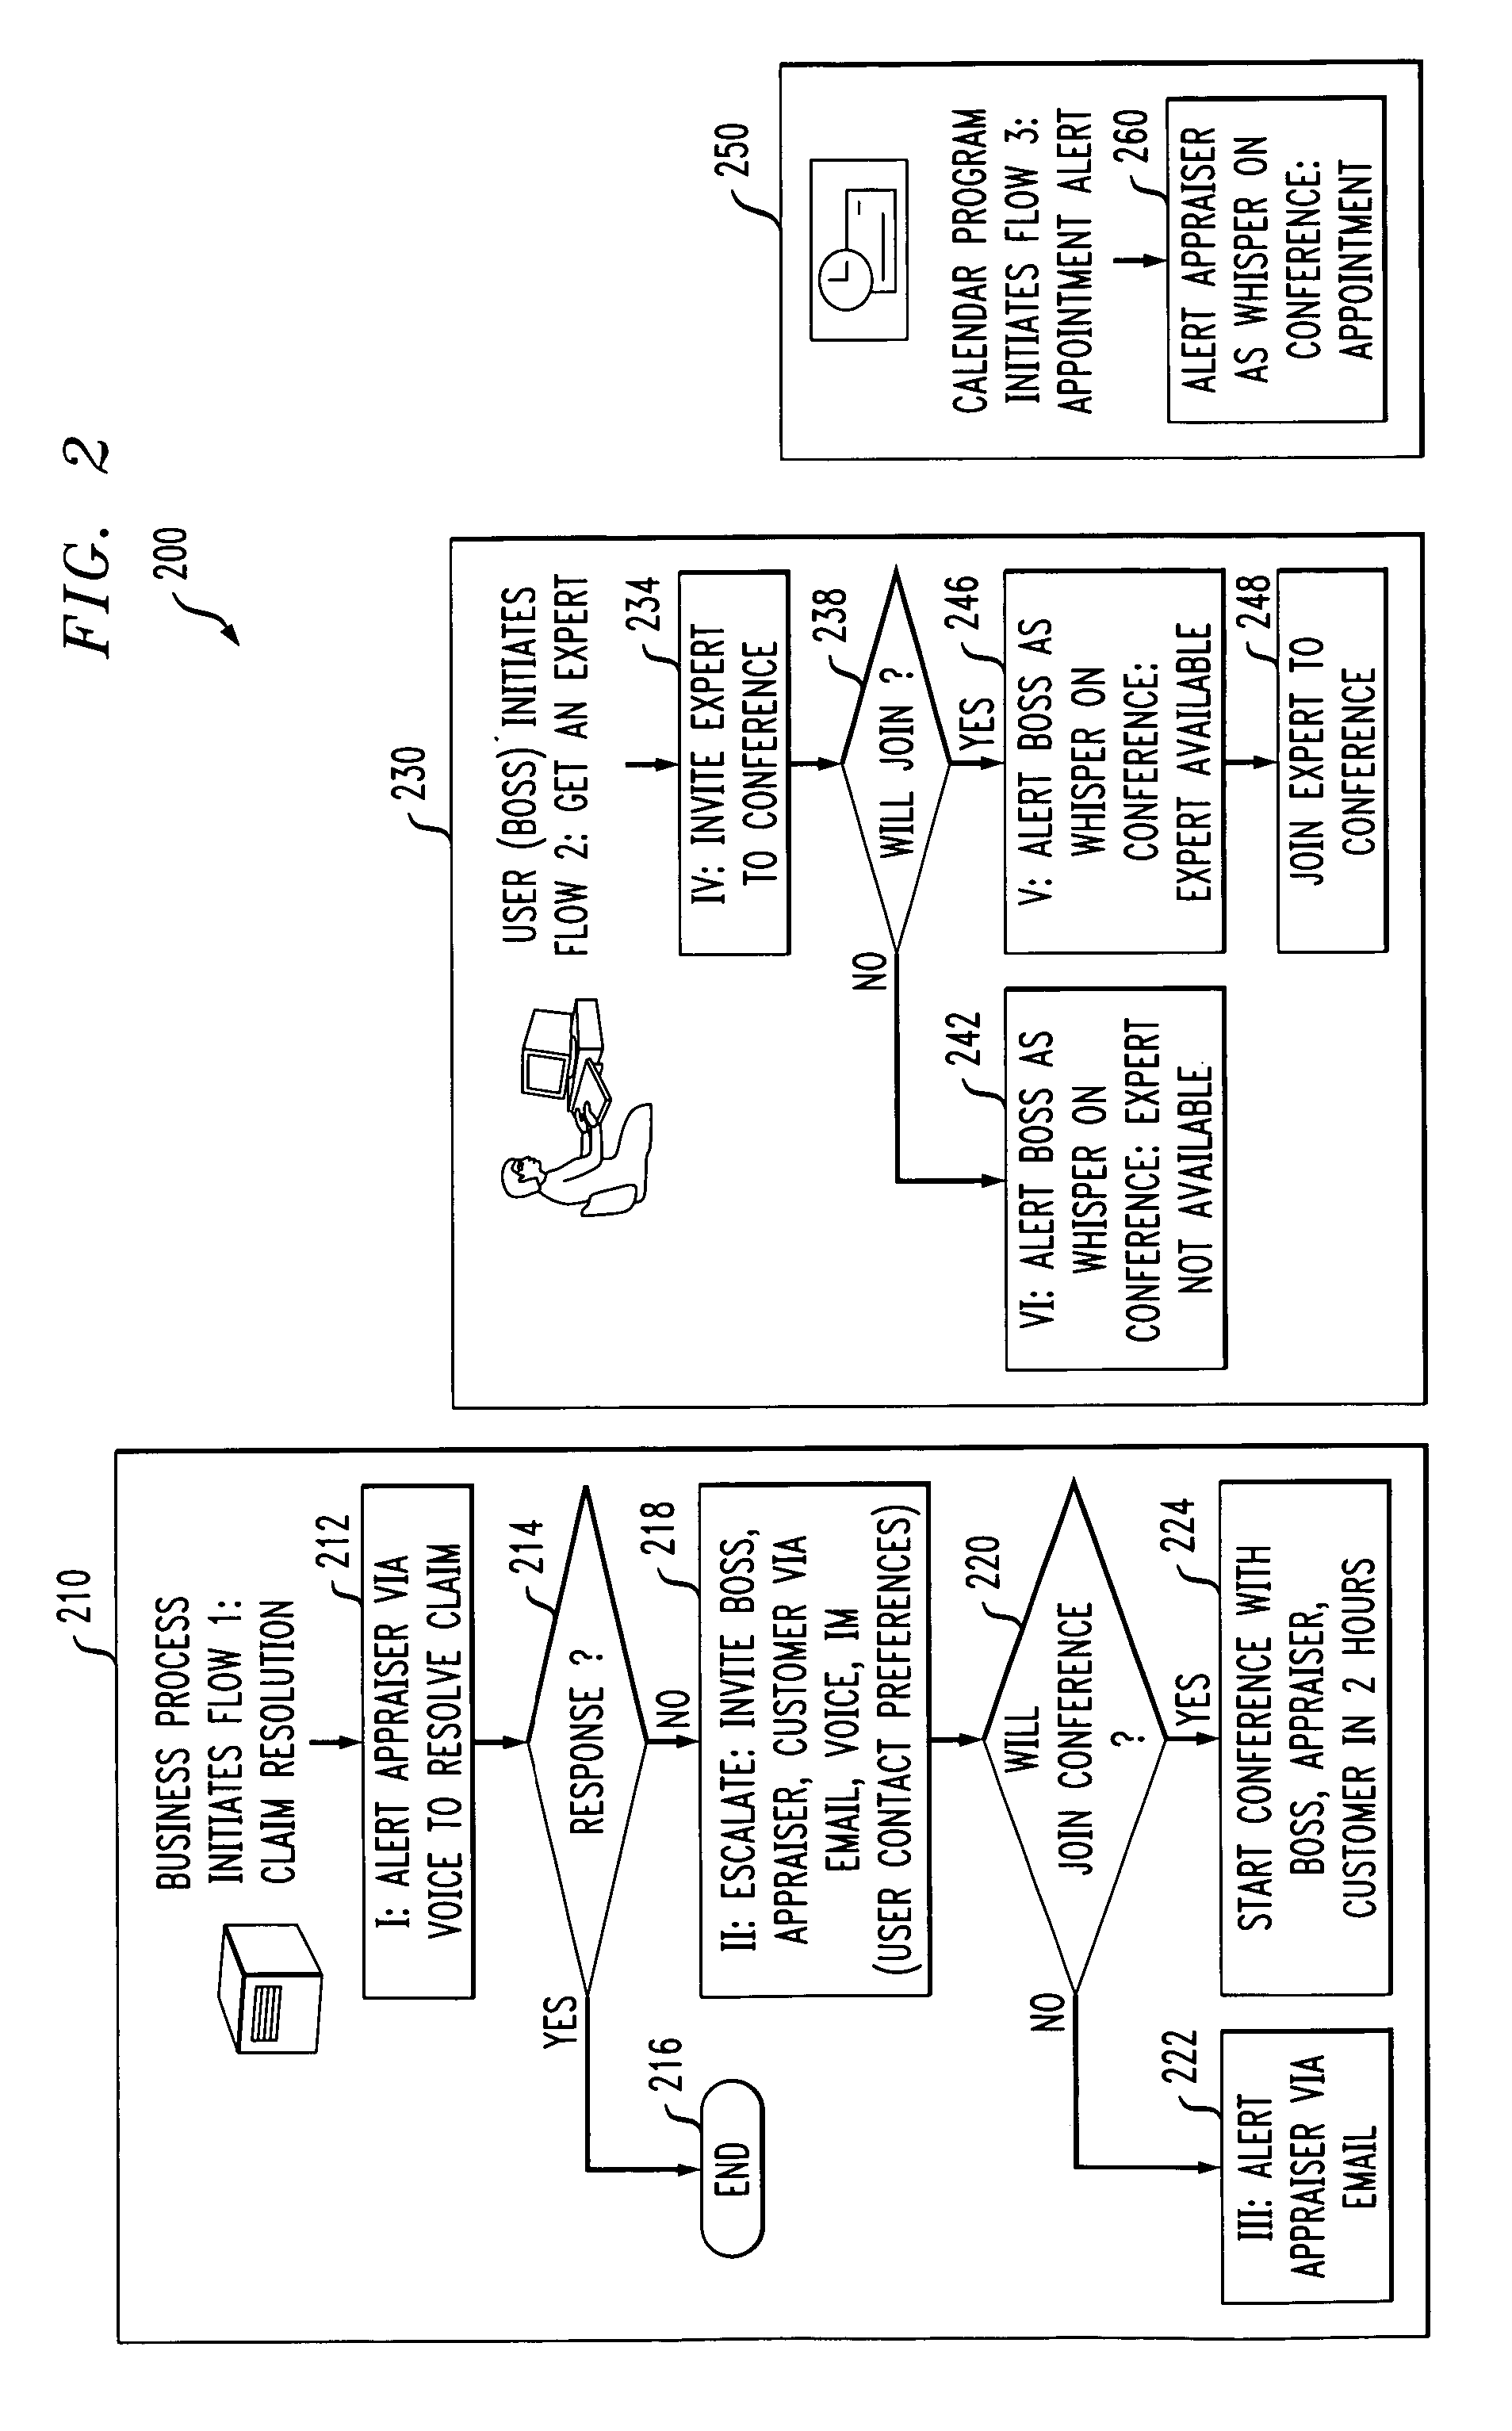 Method and apparatus for providing communication tasks in a workflow